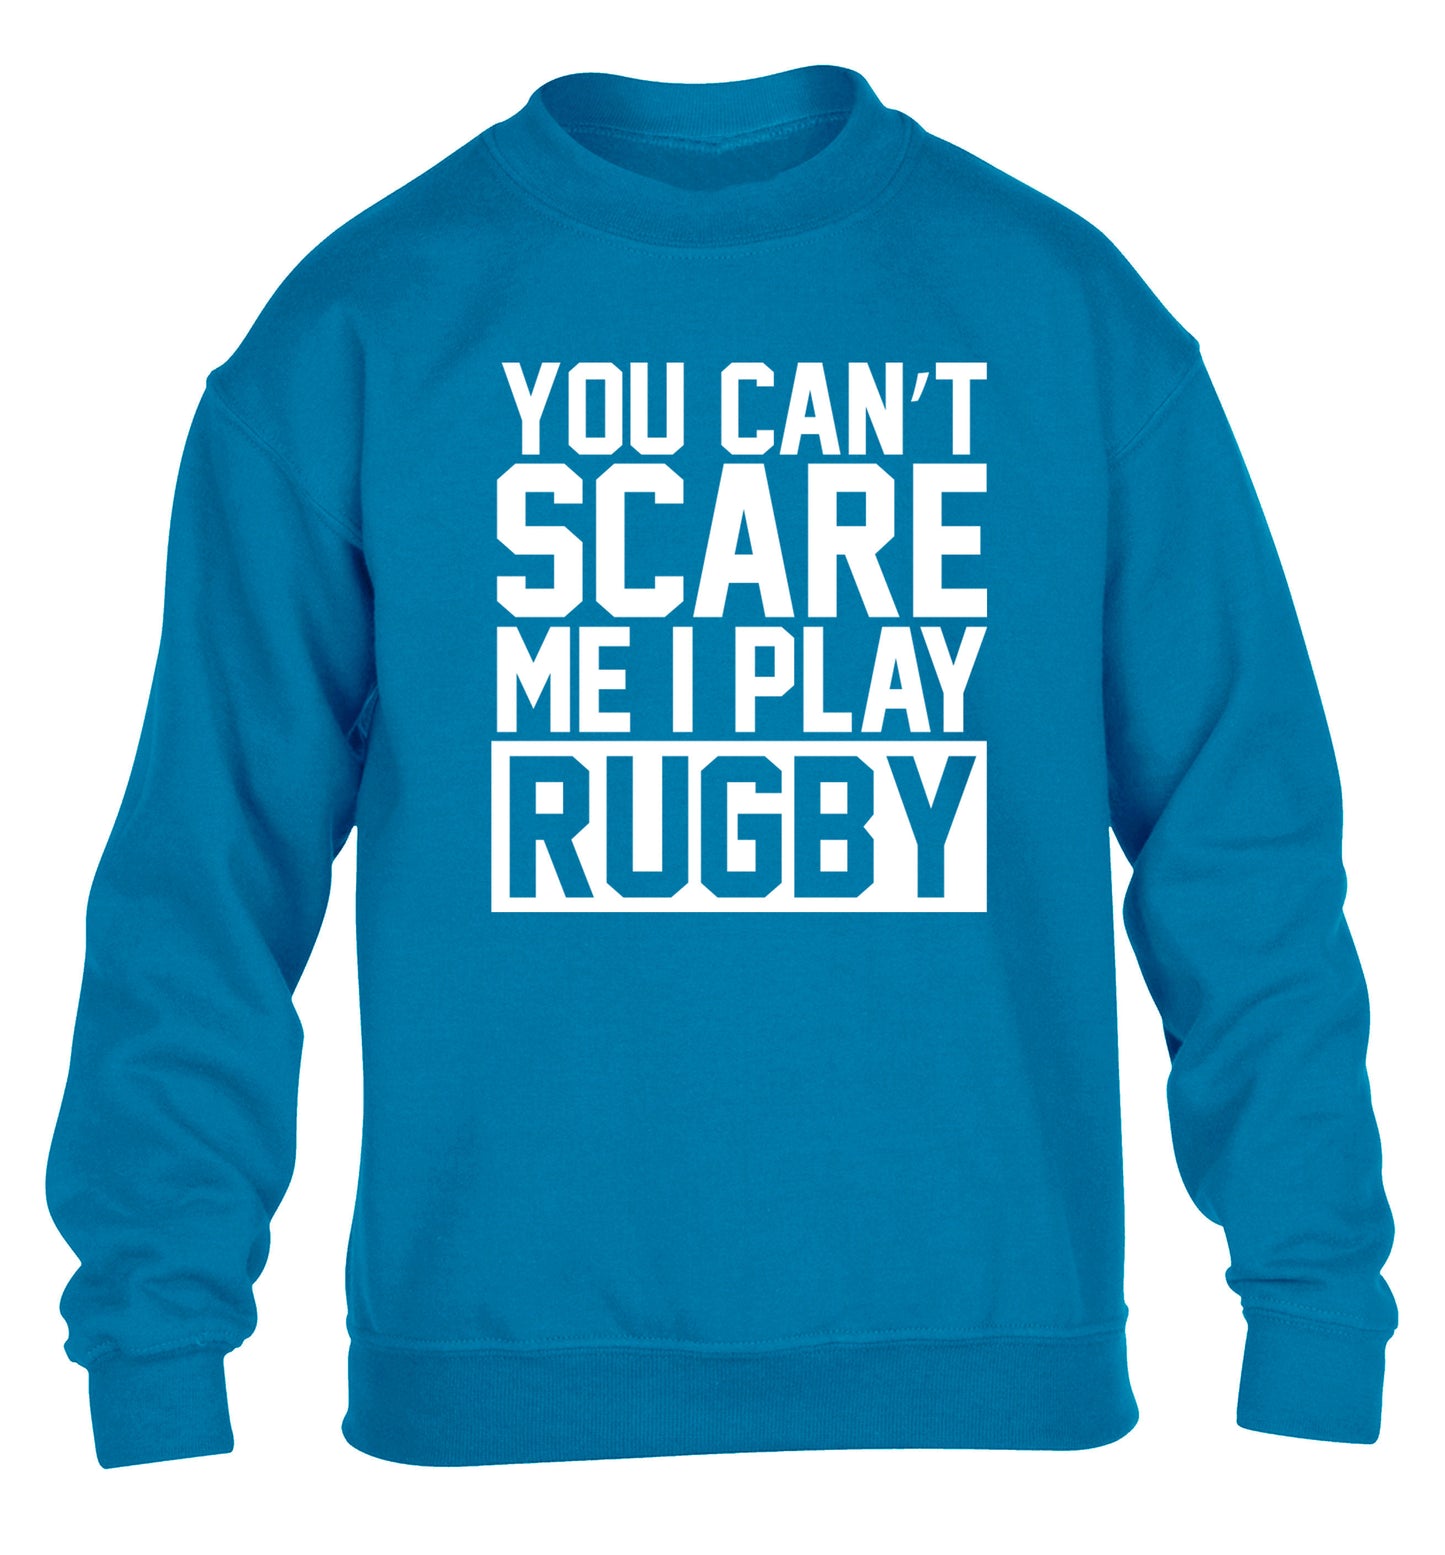 You can't scare me I play rugby children's blue sweater 12-14 Years